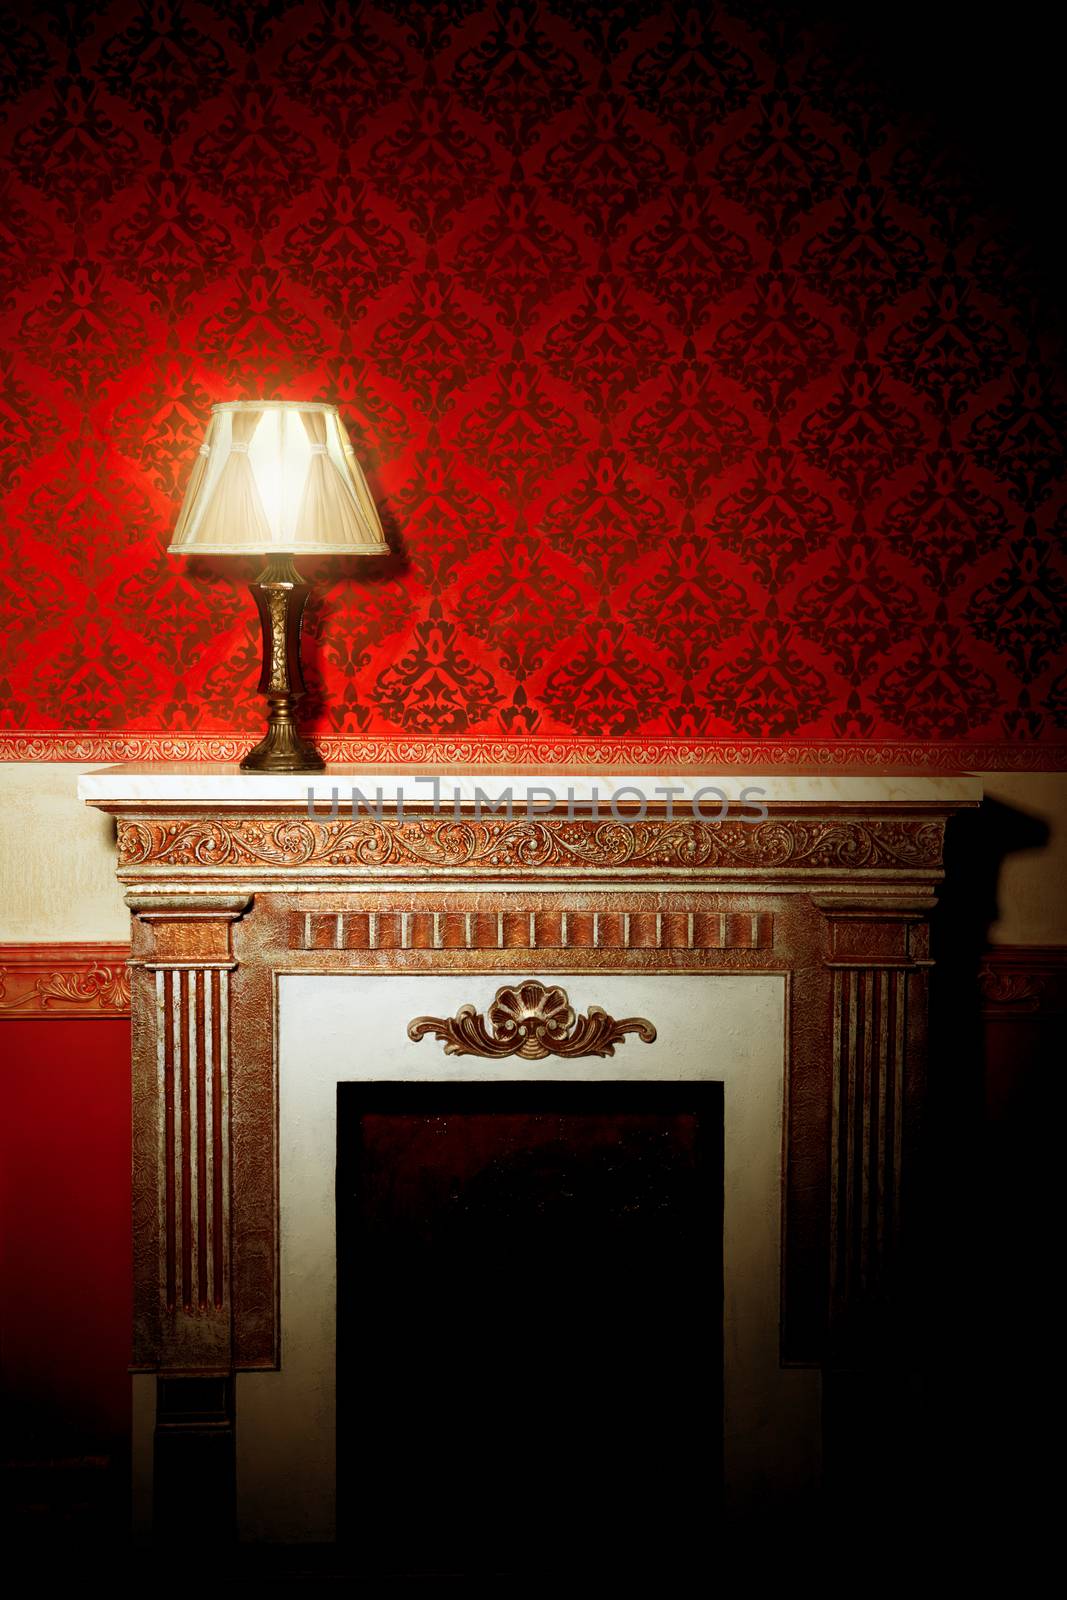 Beautiful old lamp on fireplace in red vintage room